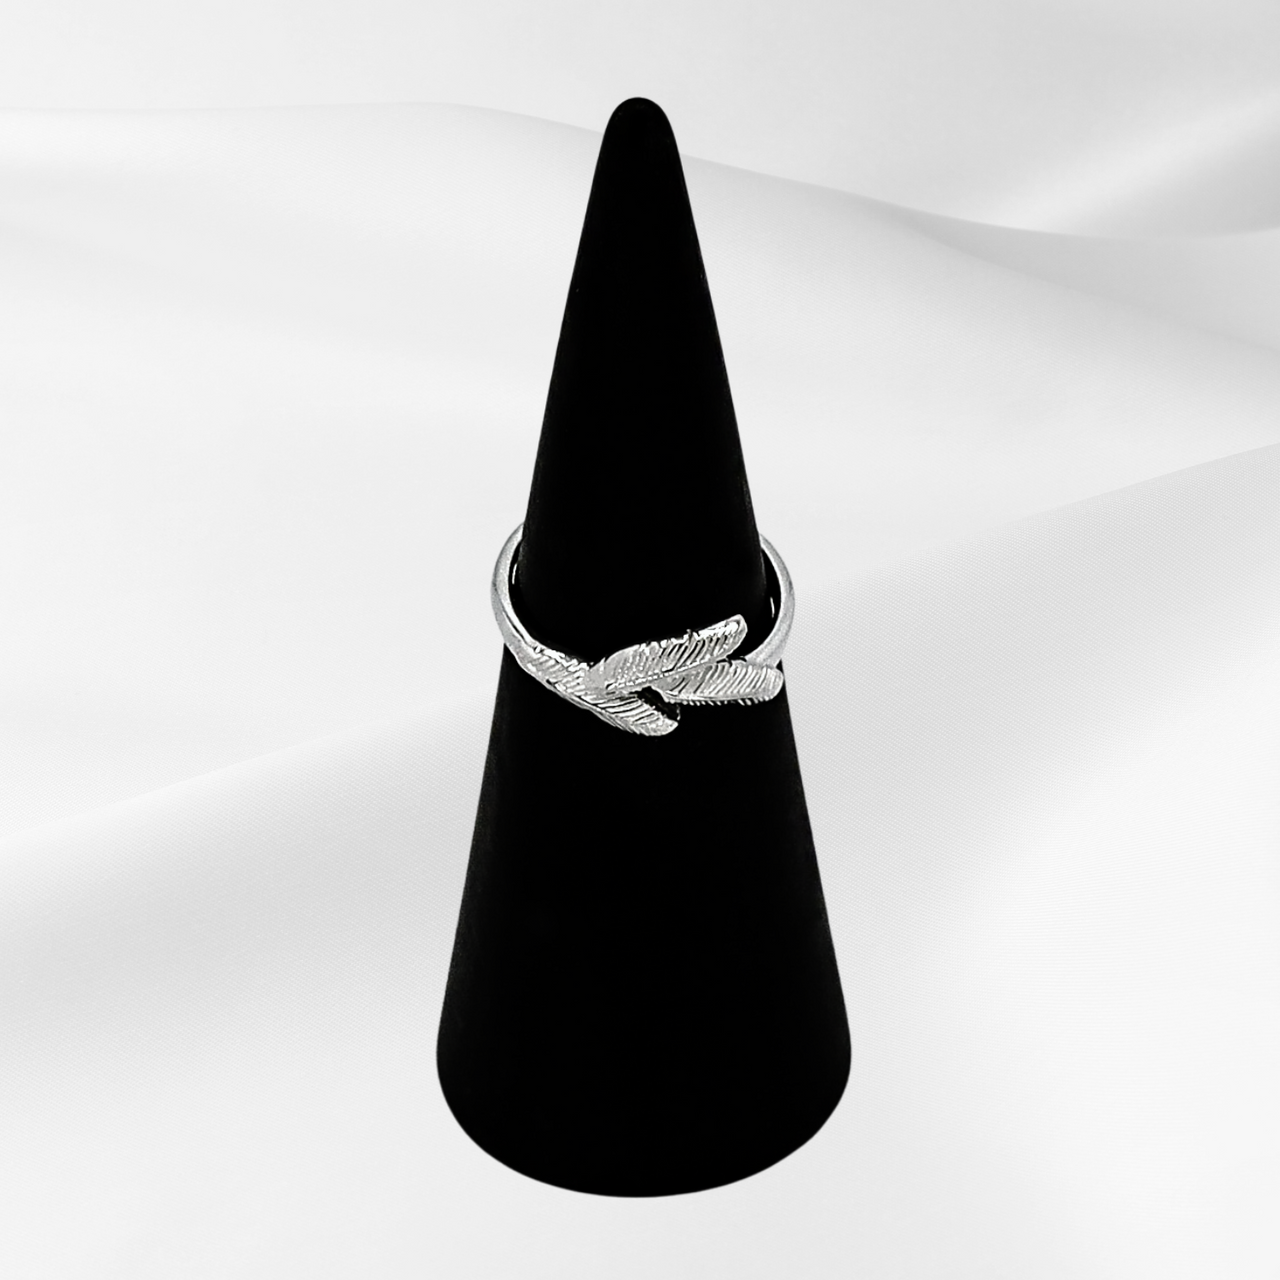 Soar with Joy™ Ladies Ring in Sterling Silver front-facing view on ring holder